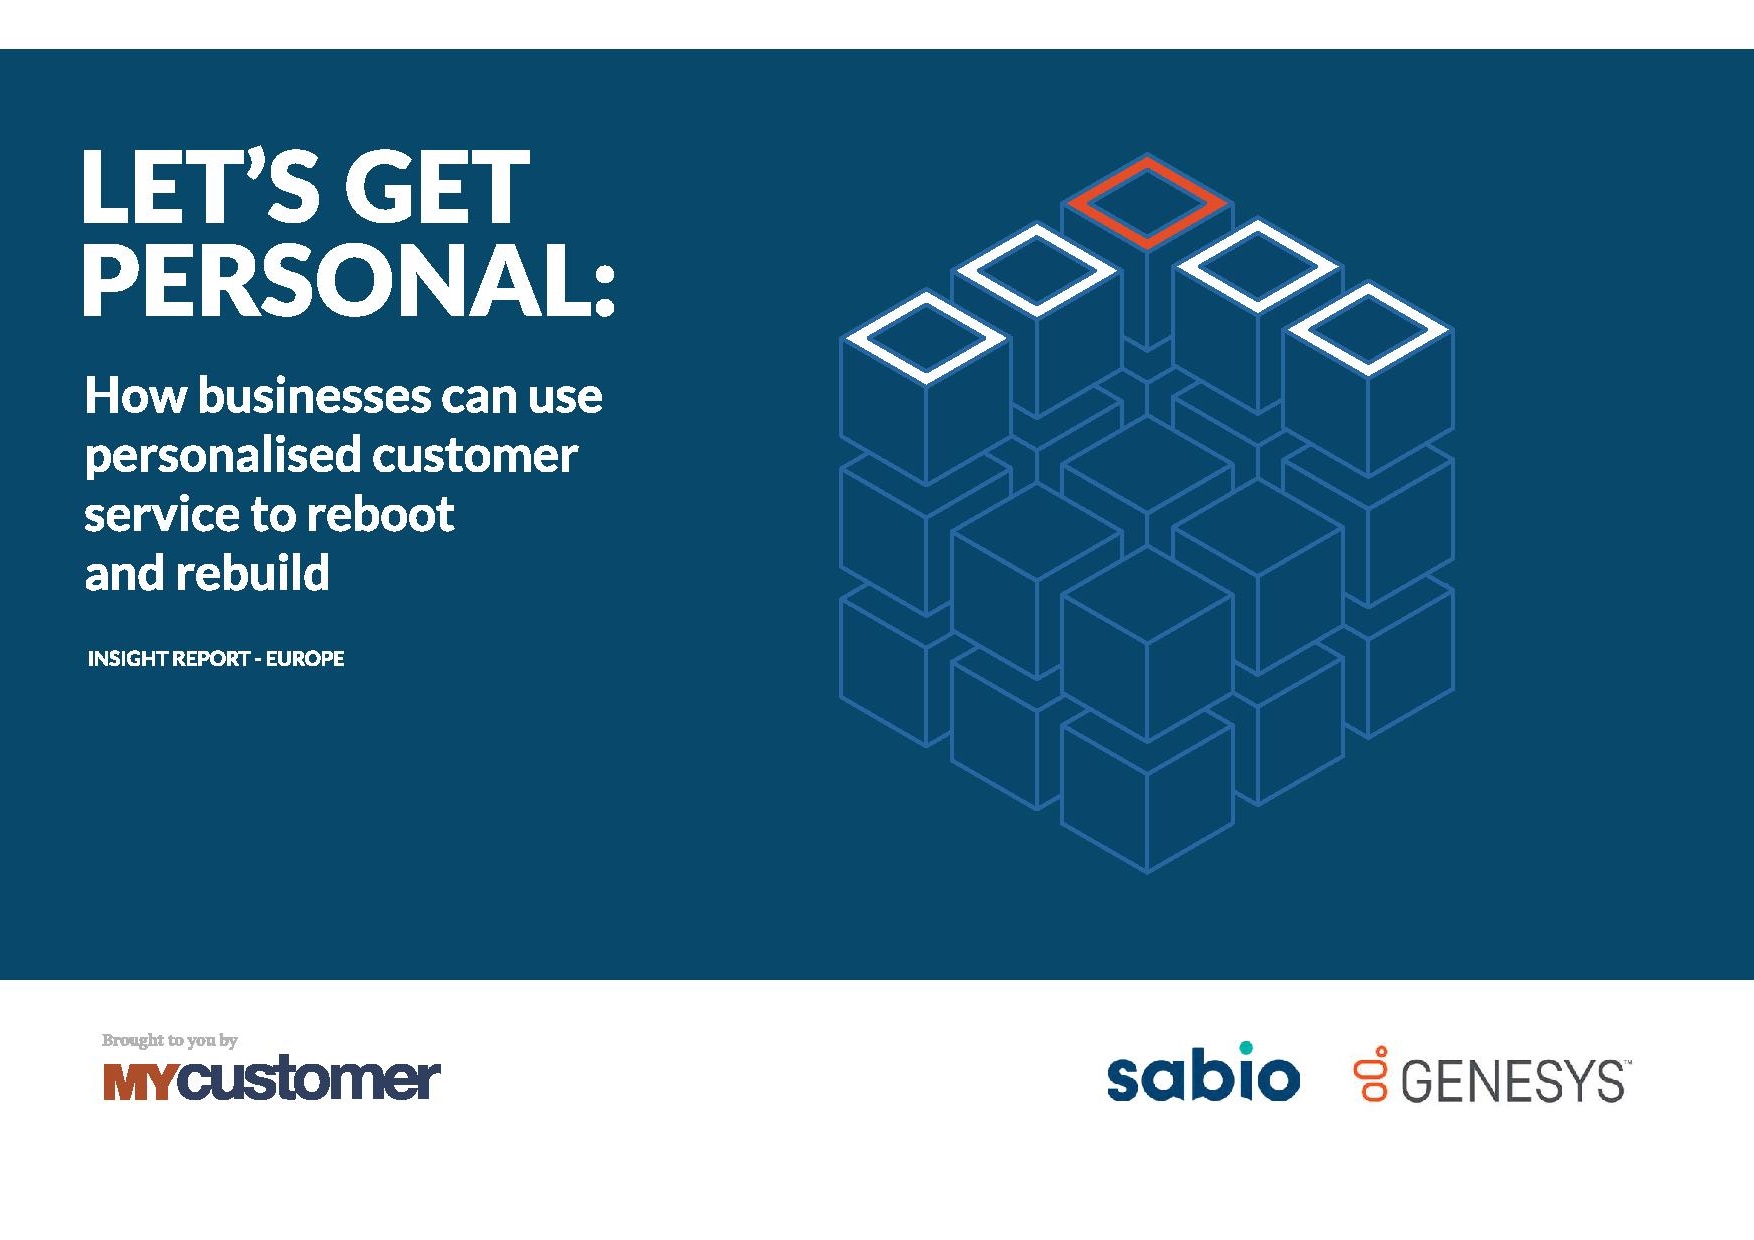 How businesses can use personalised customer service to reboot and rebuild